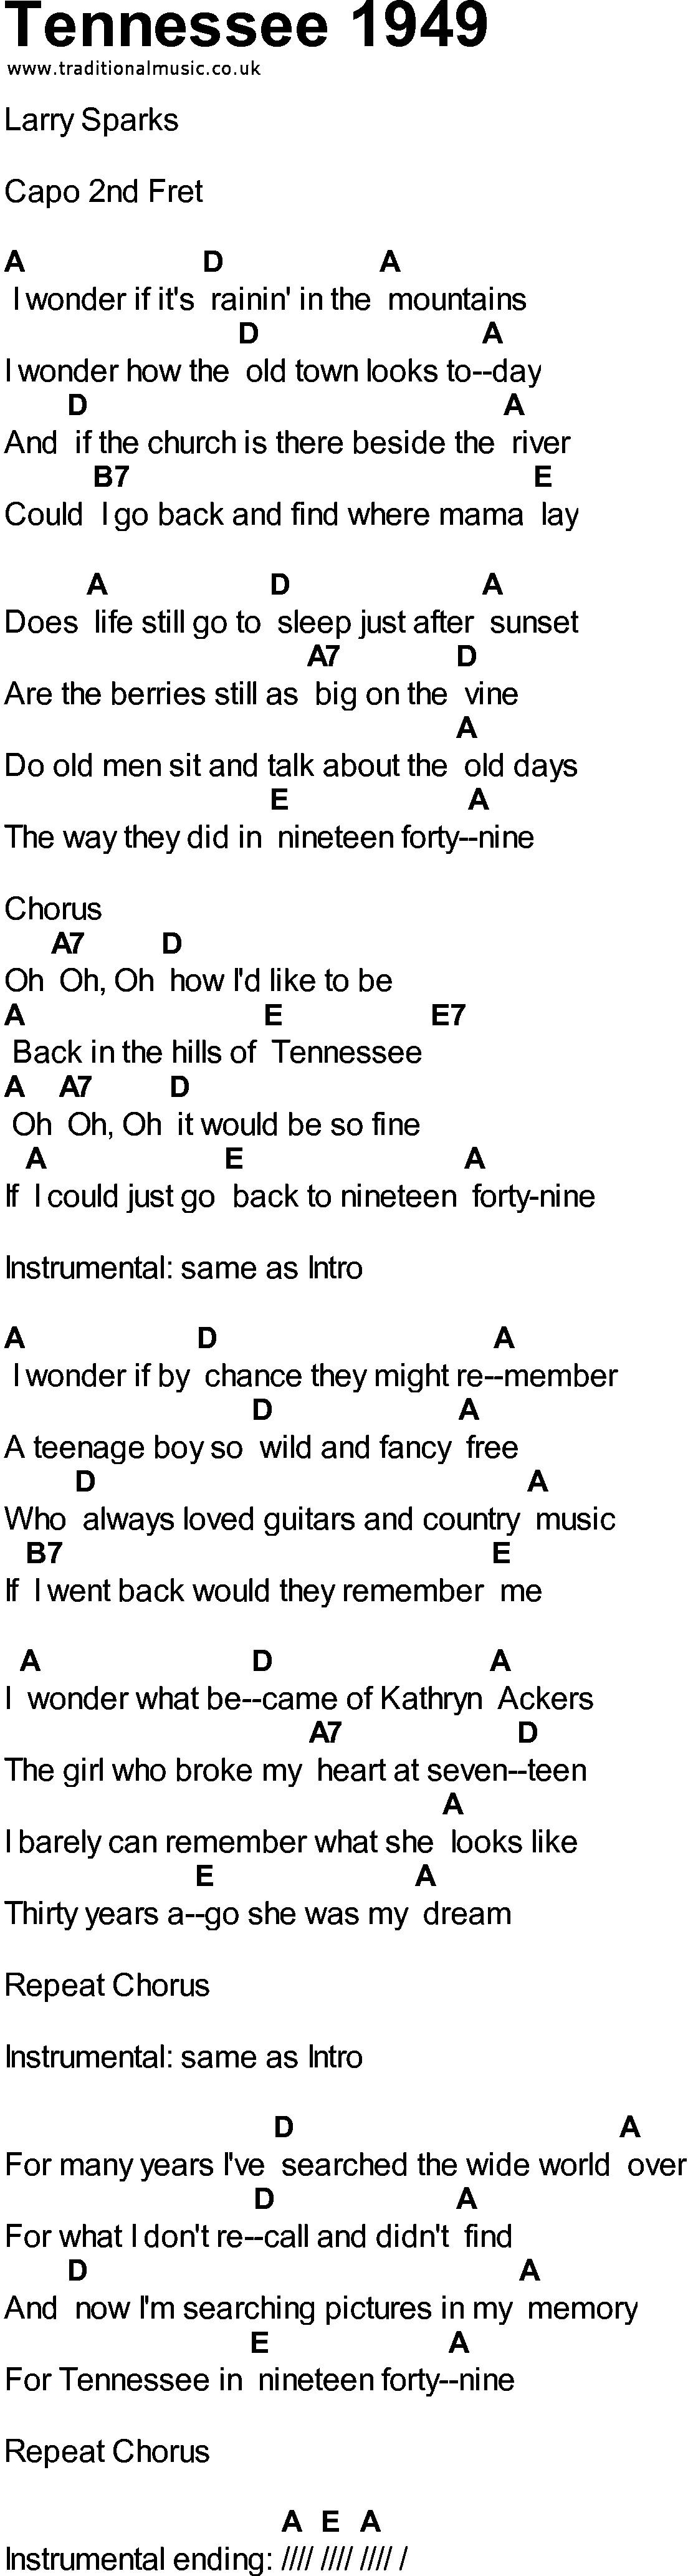 Bluegrass songs with chords - Tennessee 1949